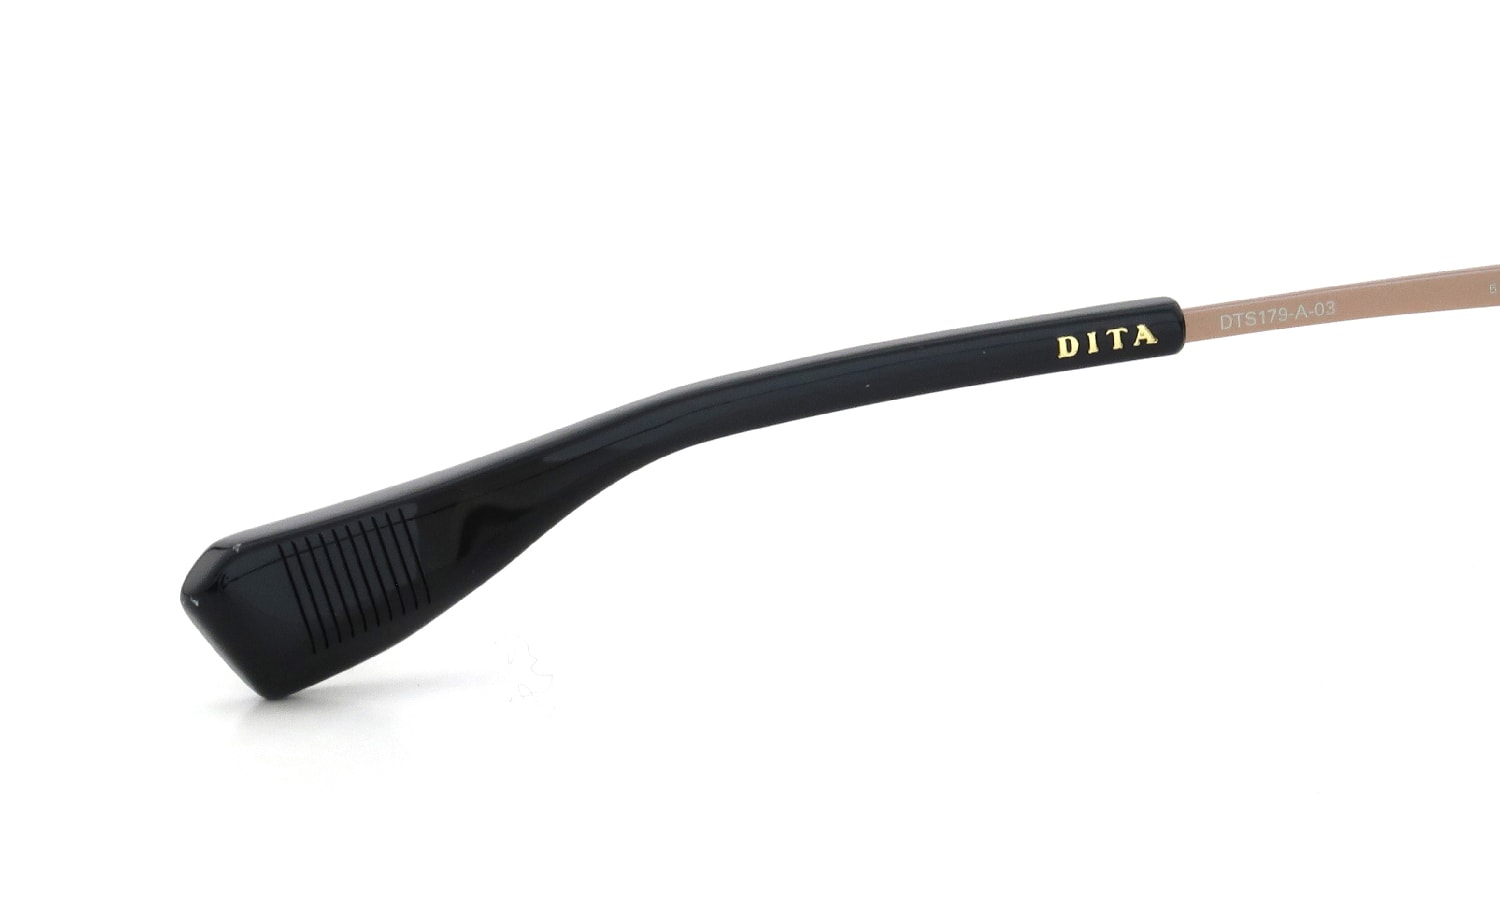 DITA サングラス通販 POETICON TWO 53size DTS179-A-03